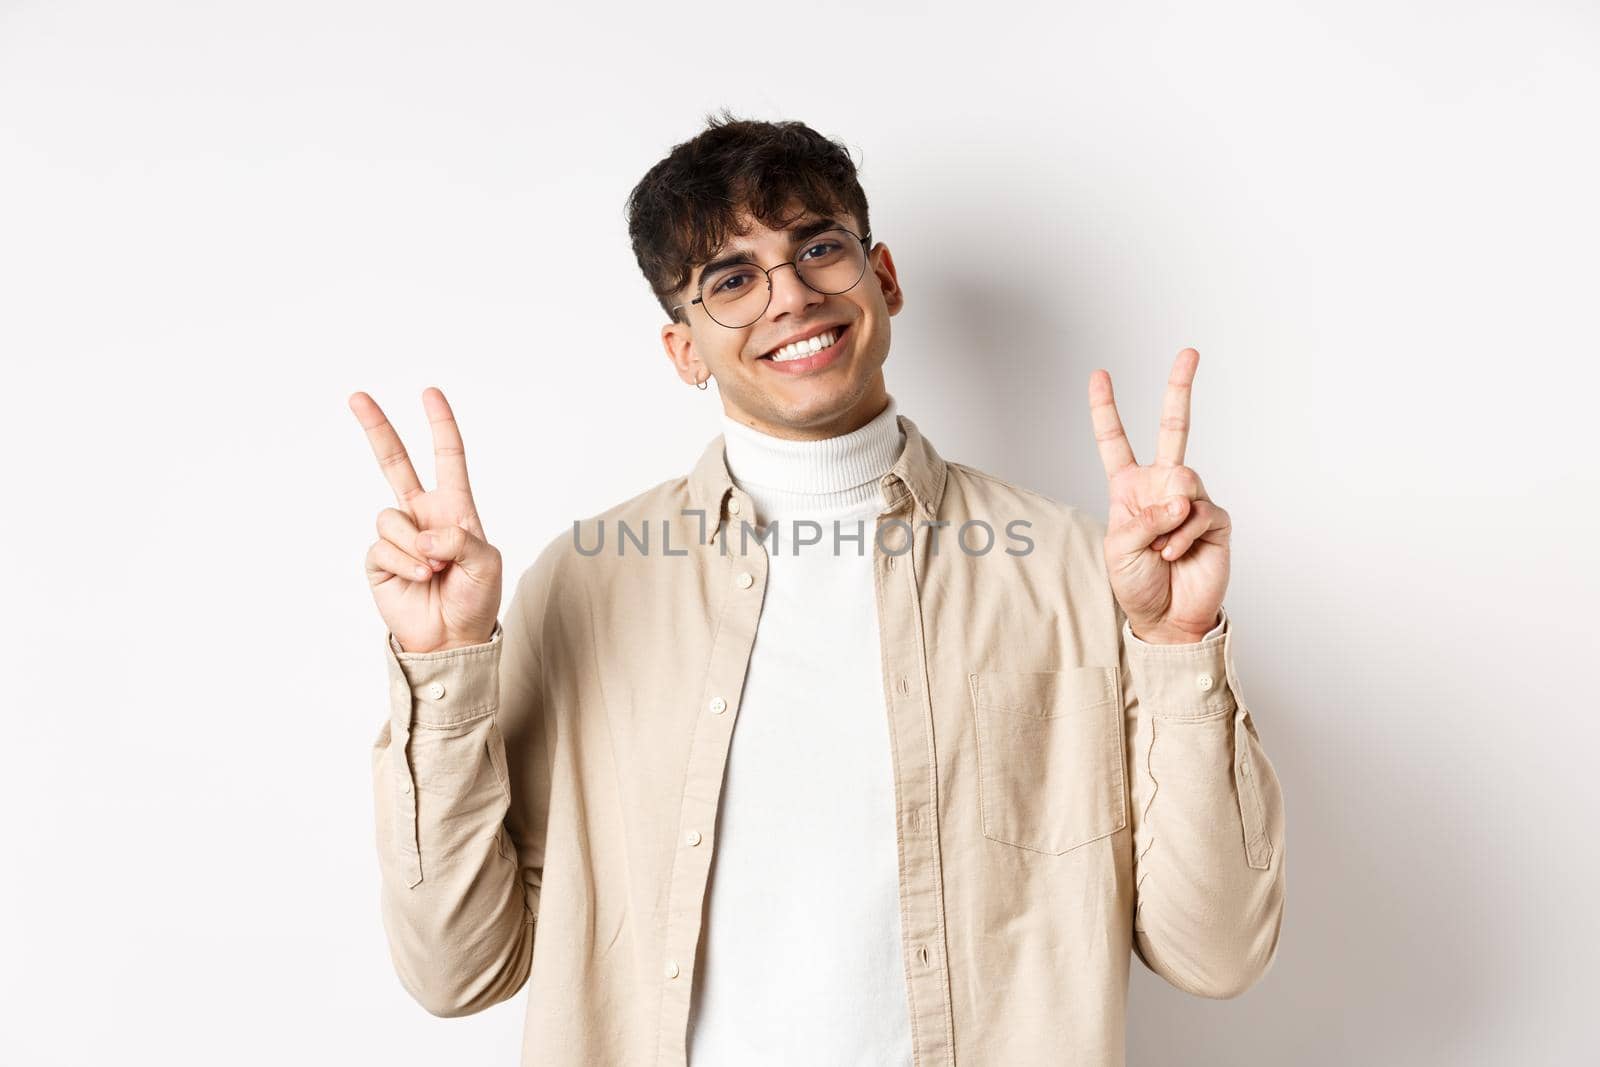 Handsome hipster guy in glasses, smiling with white teeth, showing peace or victory gesture, standing upbeat on white background.